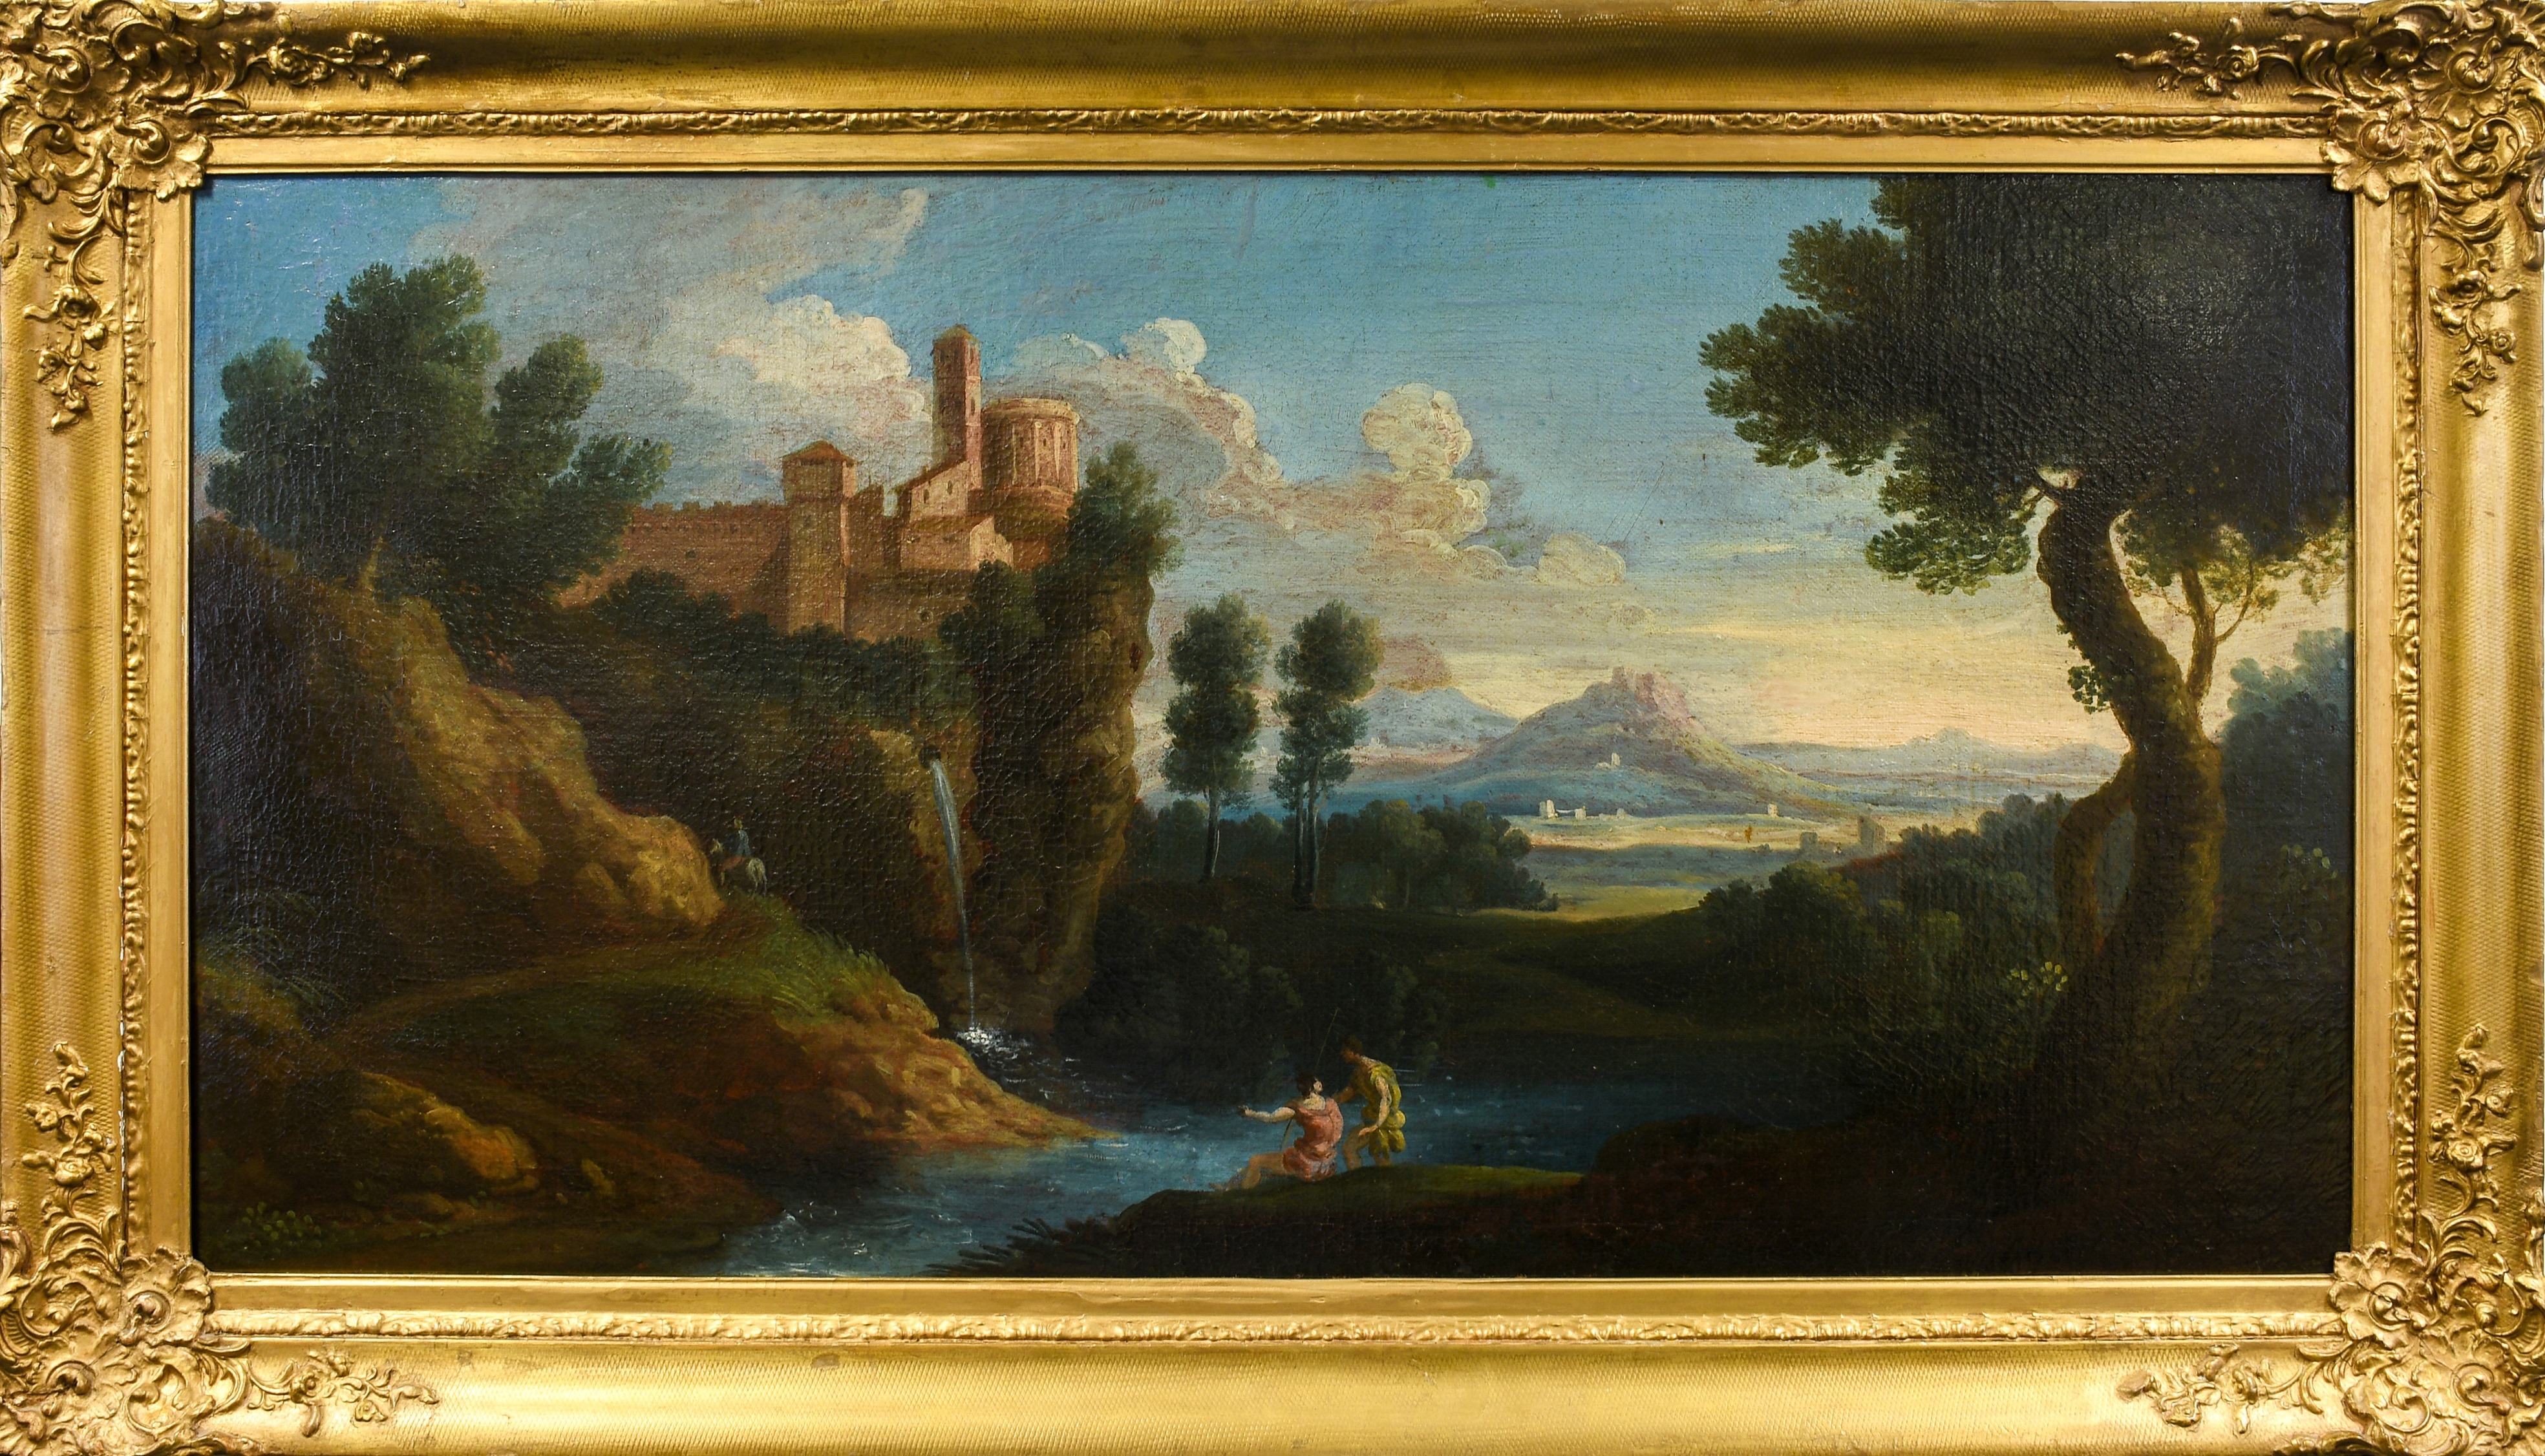 Artwork by Nicolas Poussin, Classical figures in an Italianate landscape, Made of Oil on canvas